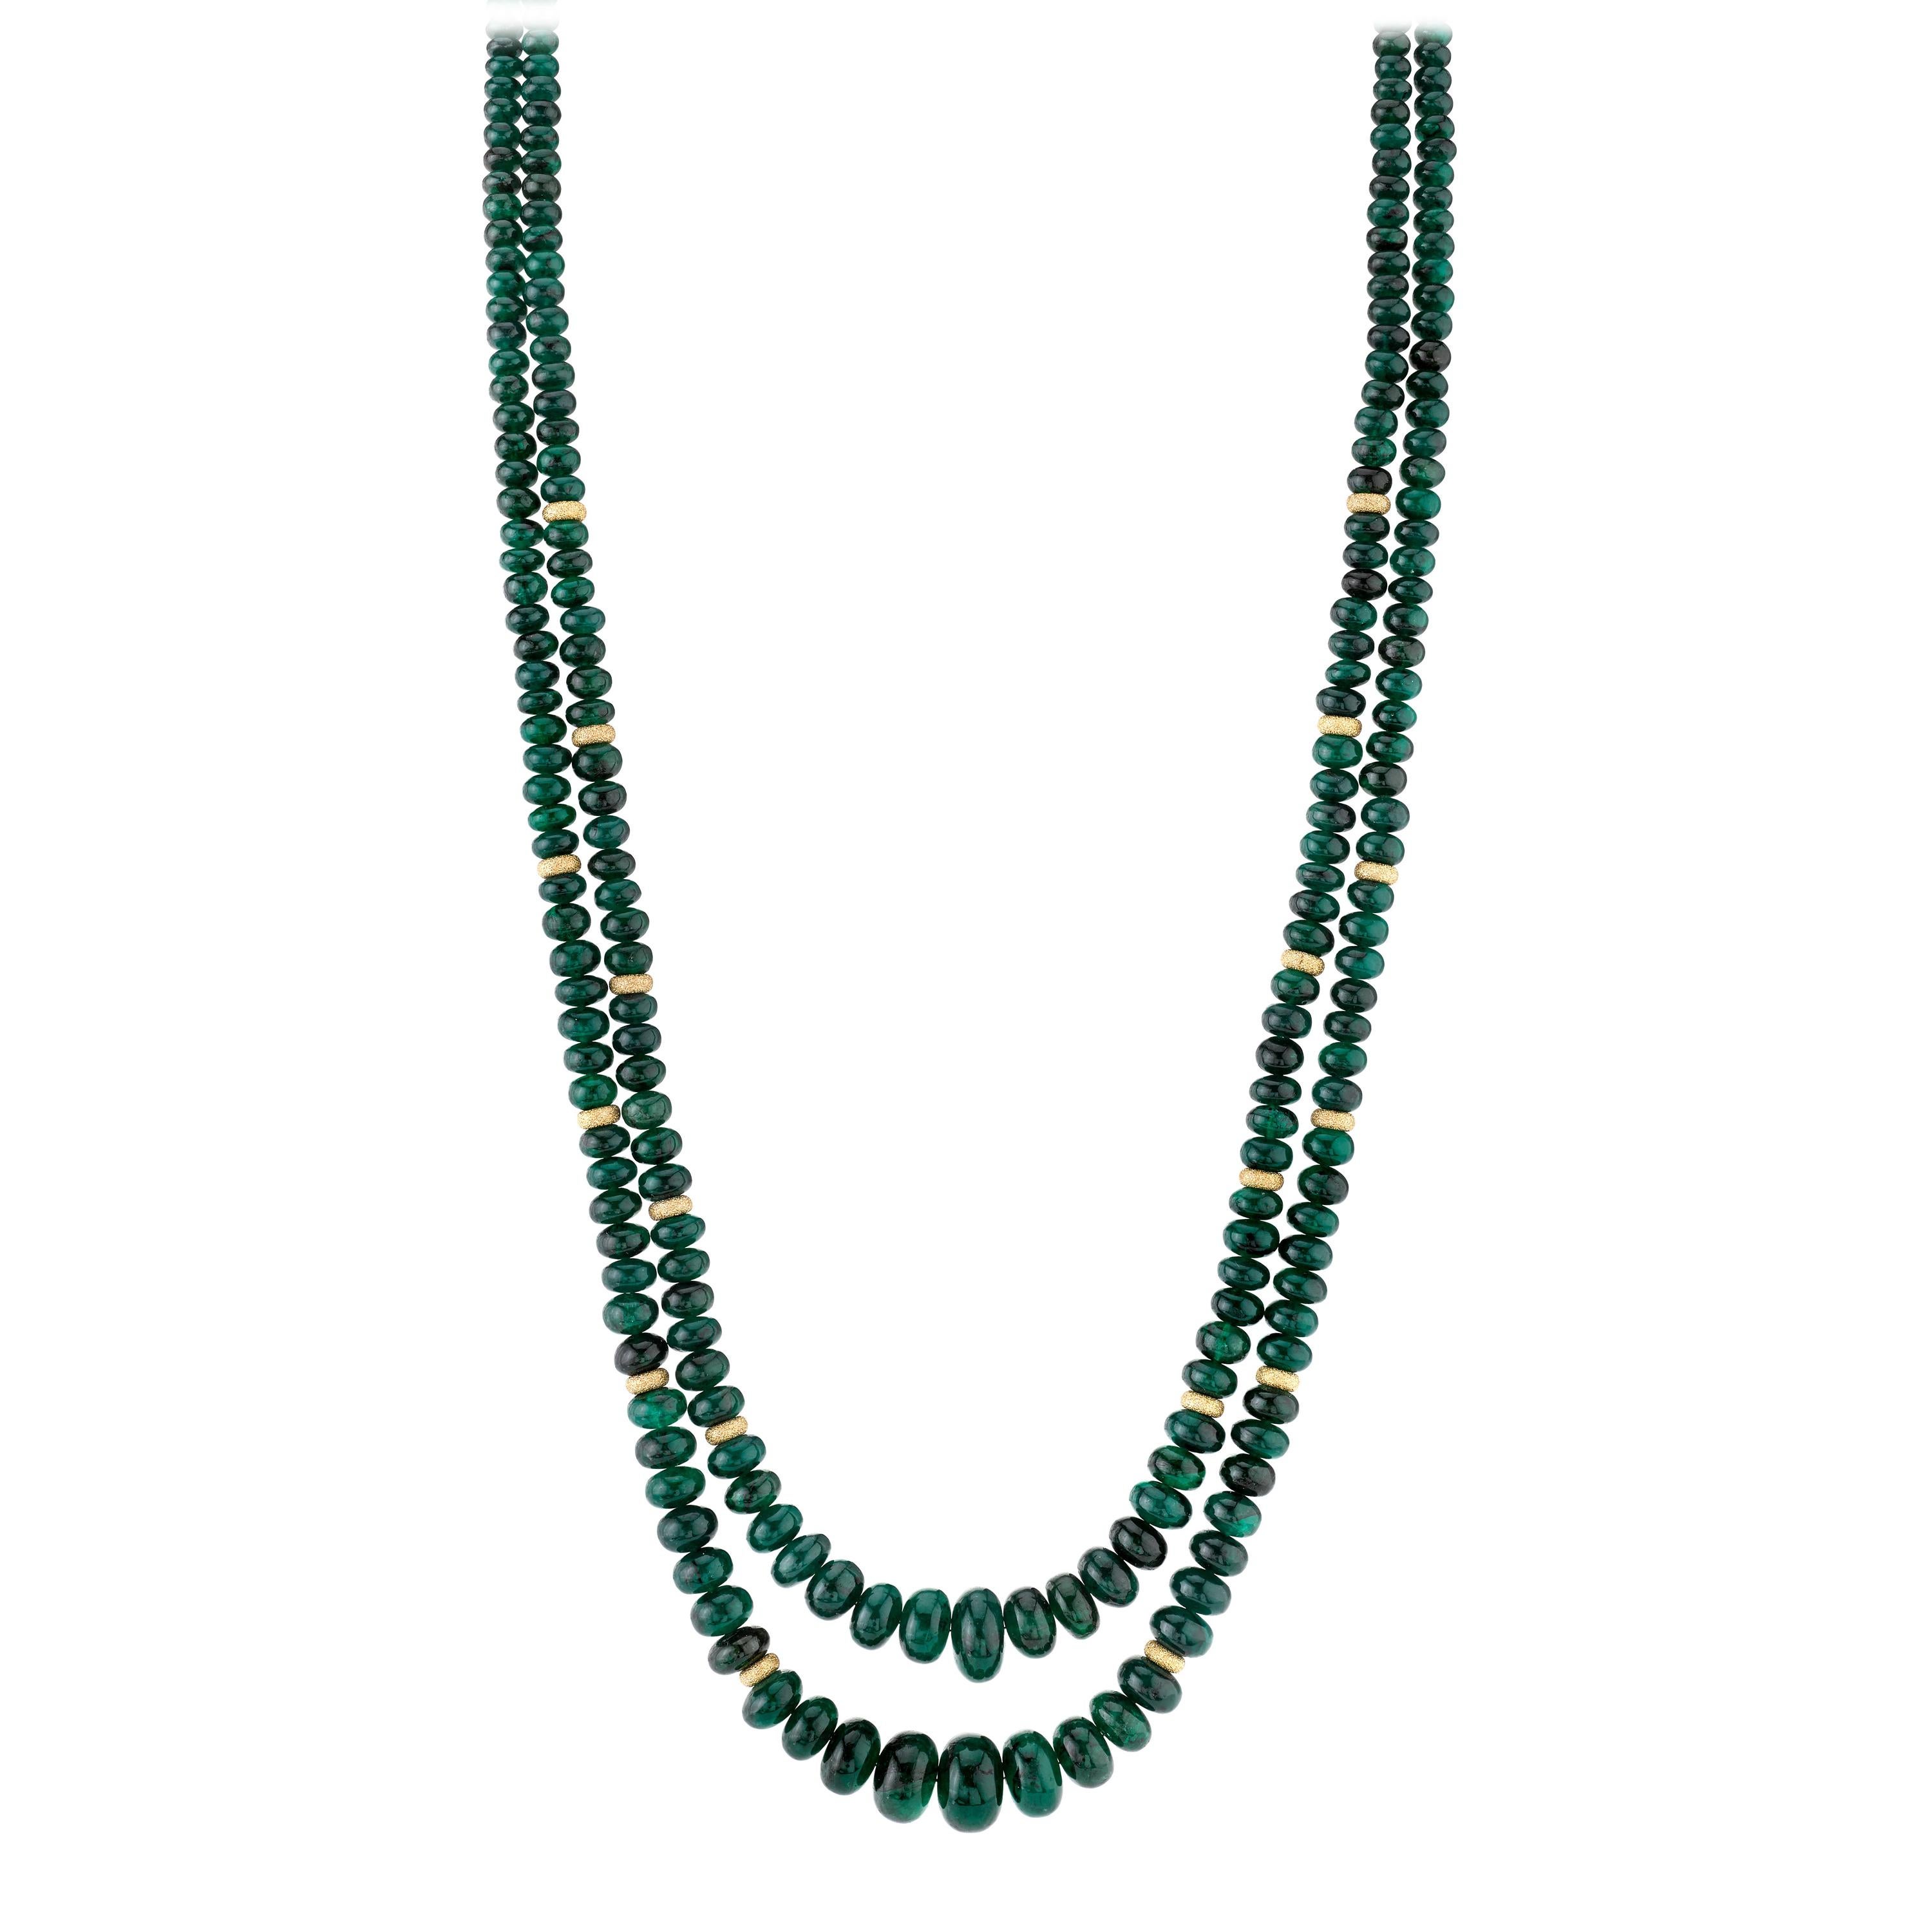  Emerald Beaded Multi-Strand Necklace with Yellow Gold Accents, 200 Carats Total For Sale